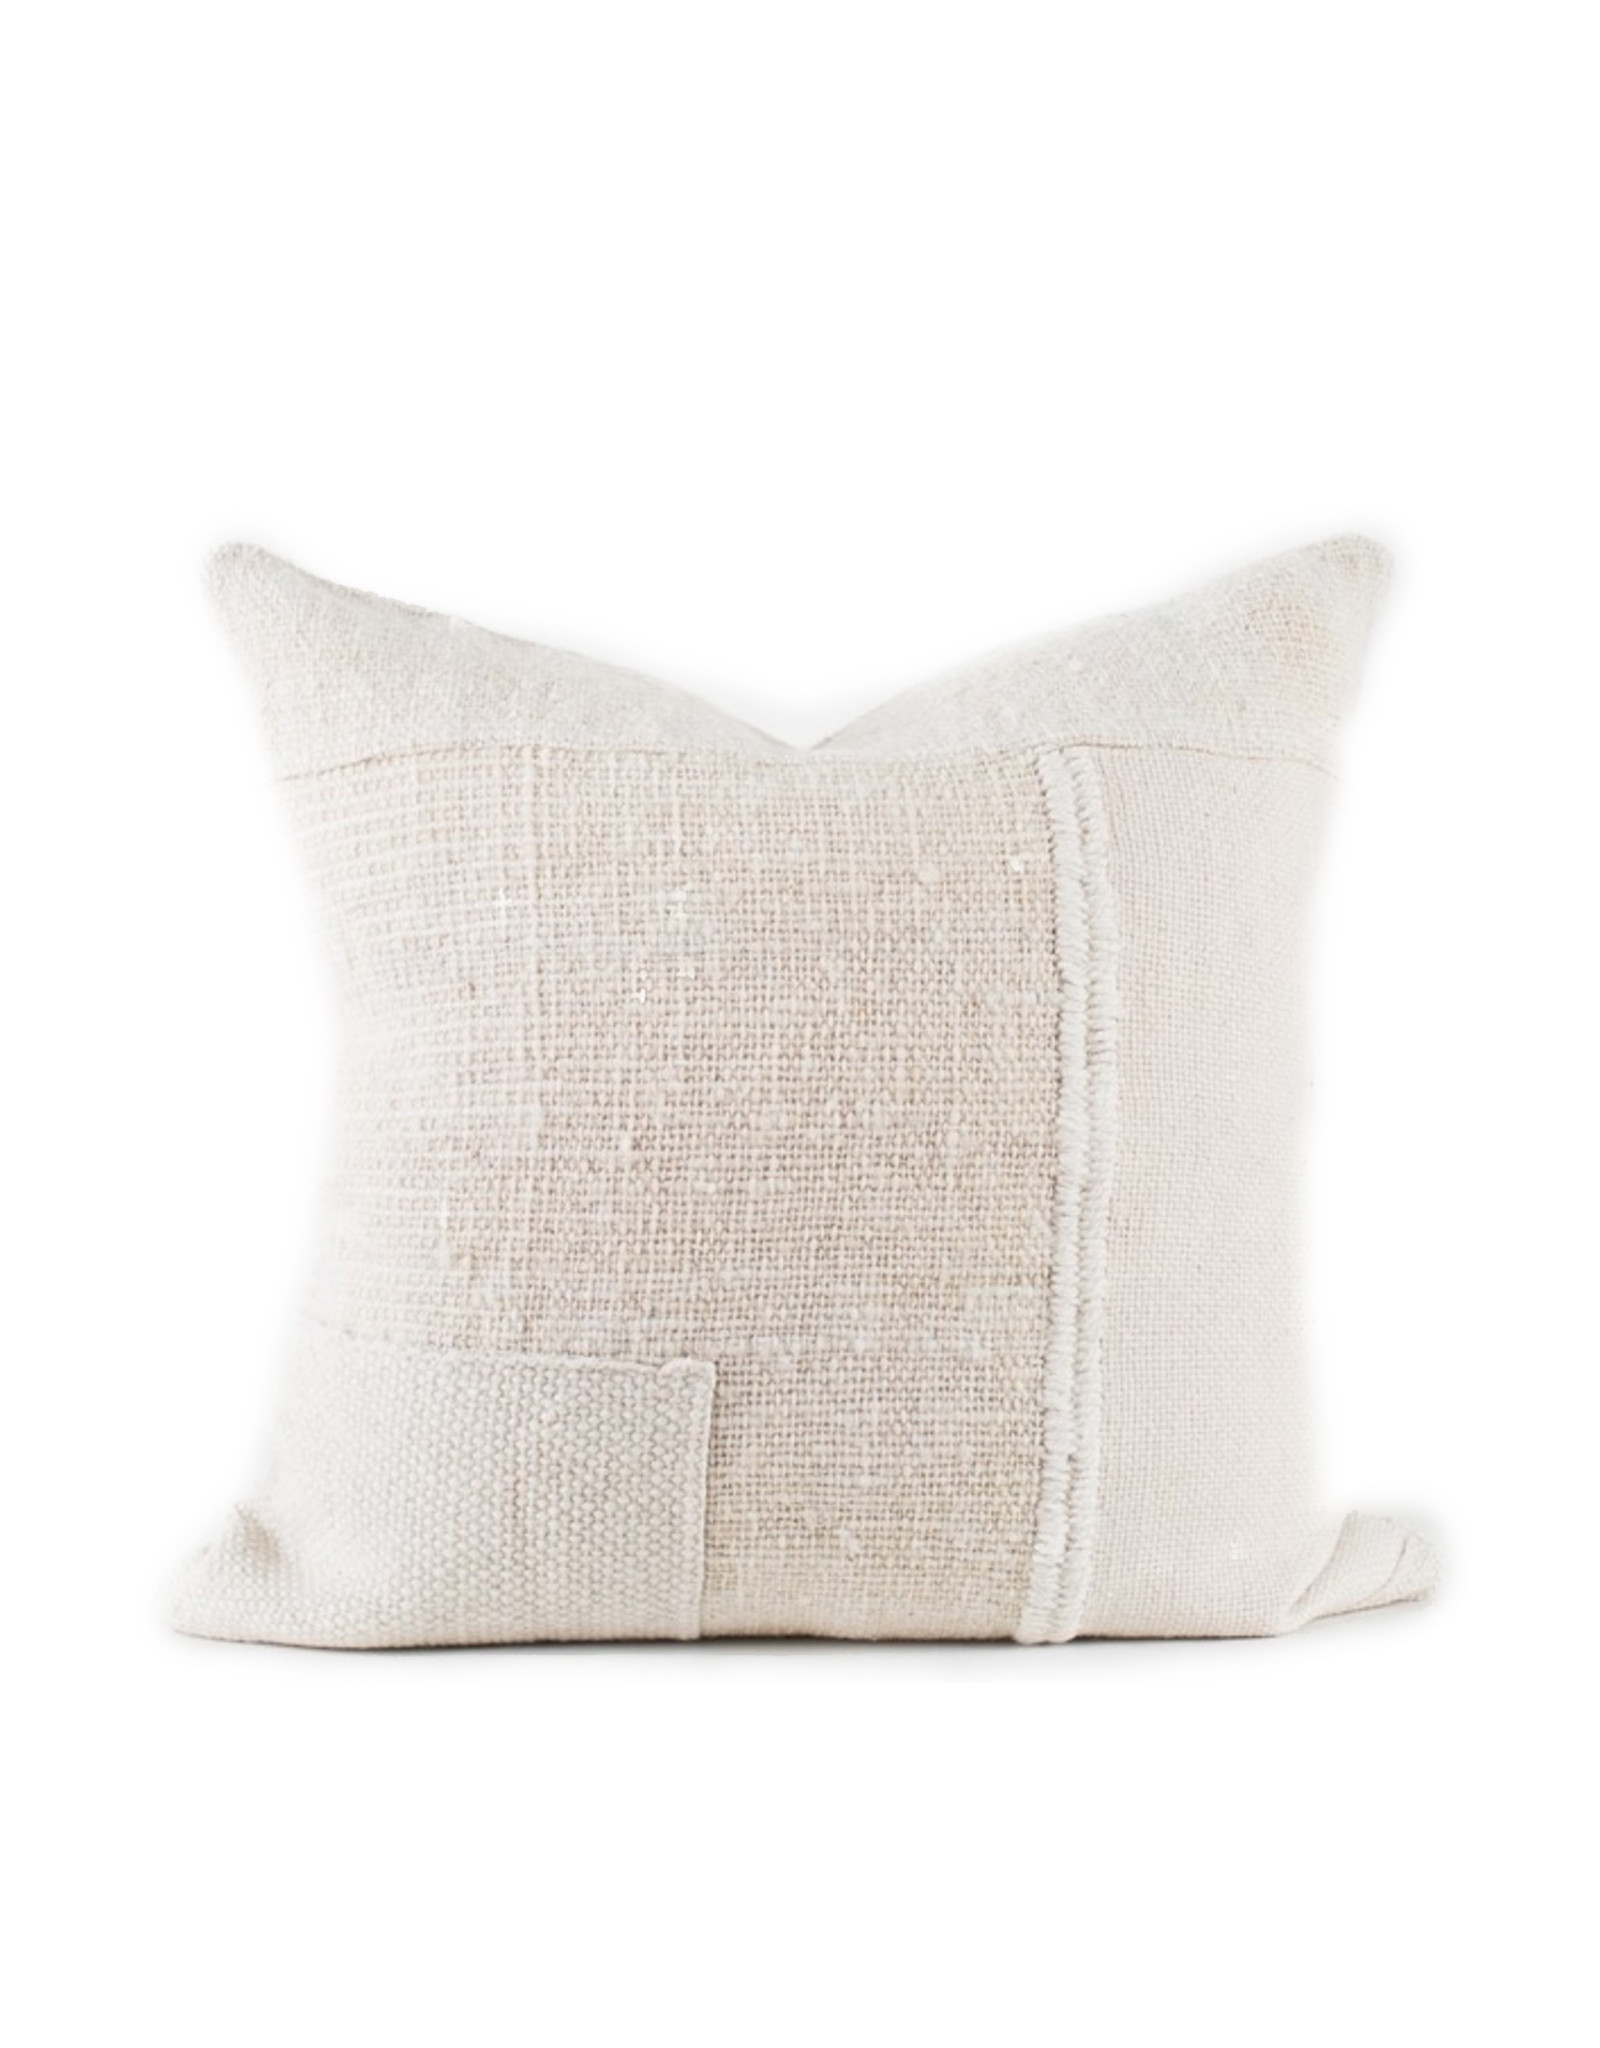 Patches White Pillow, Chile  26 x 26